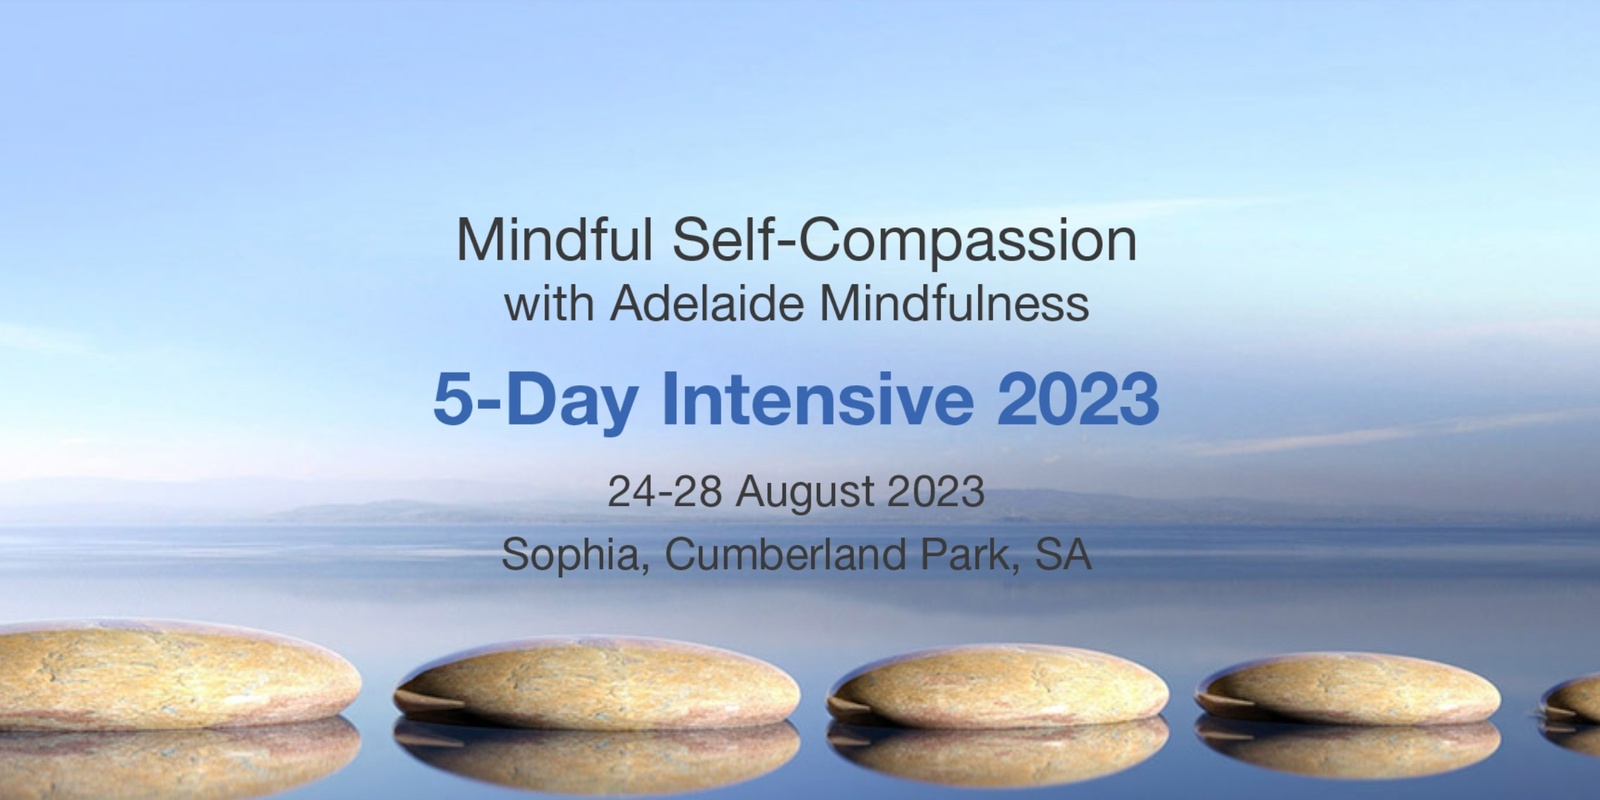 Banner image for 5-Day Mindful Self-Compassion Intensive Program, August, 2023